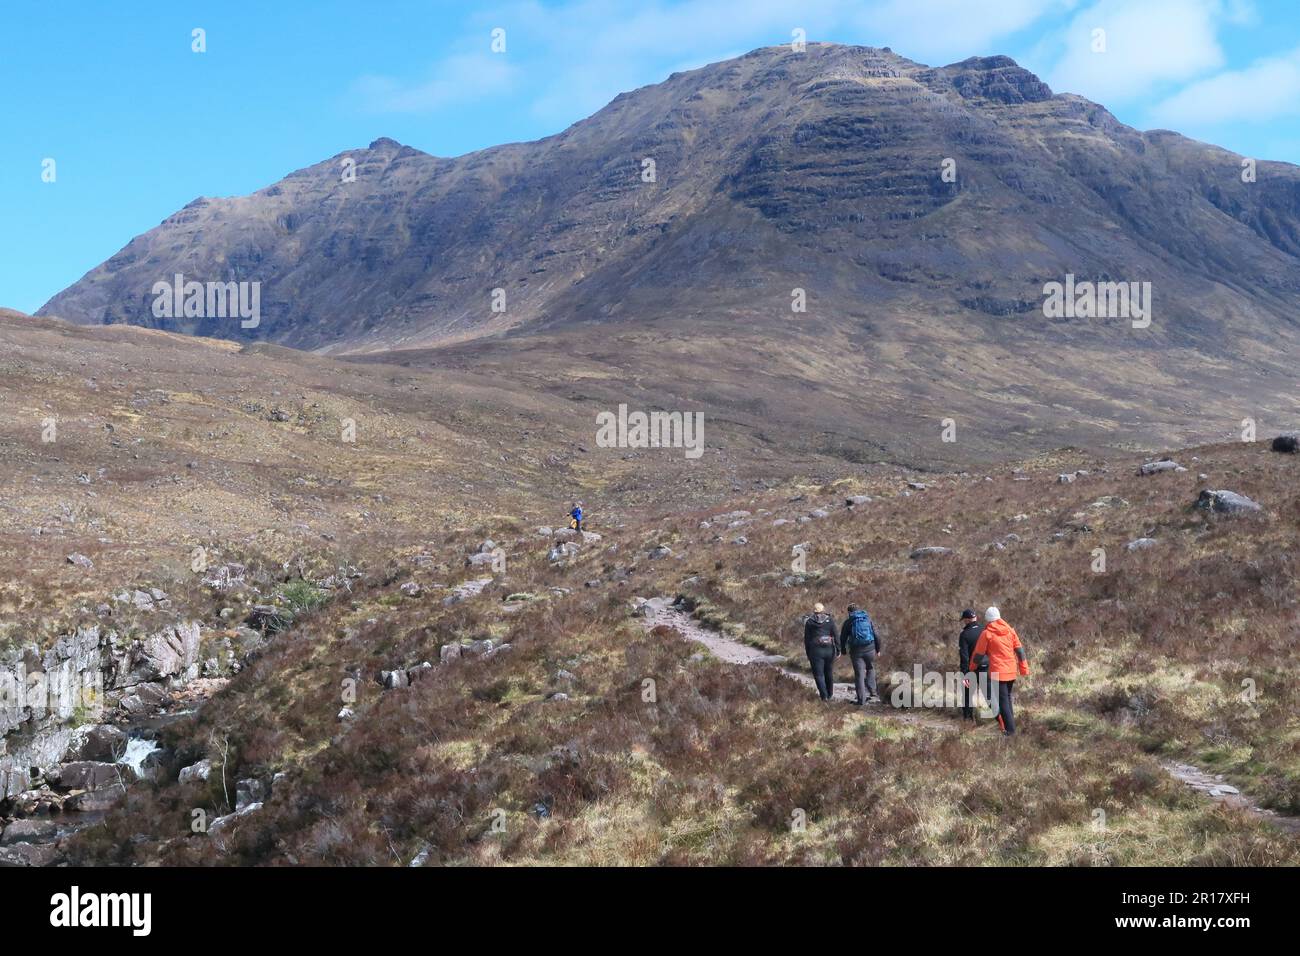 Scottish Highlands: walkers in valley of Coire MhicNobaill, near Torridon. Shows the dramatic peak of Beinn Dearg in the background. Stock Photo